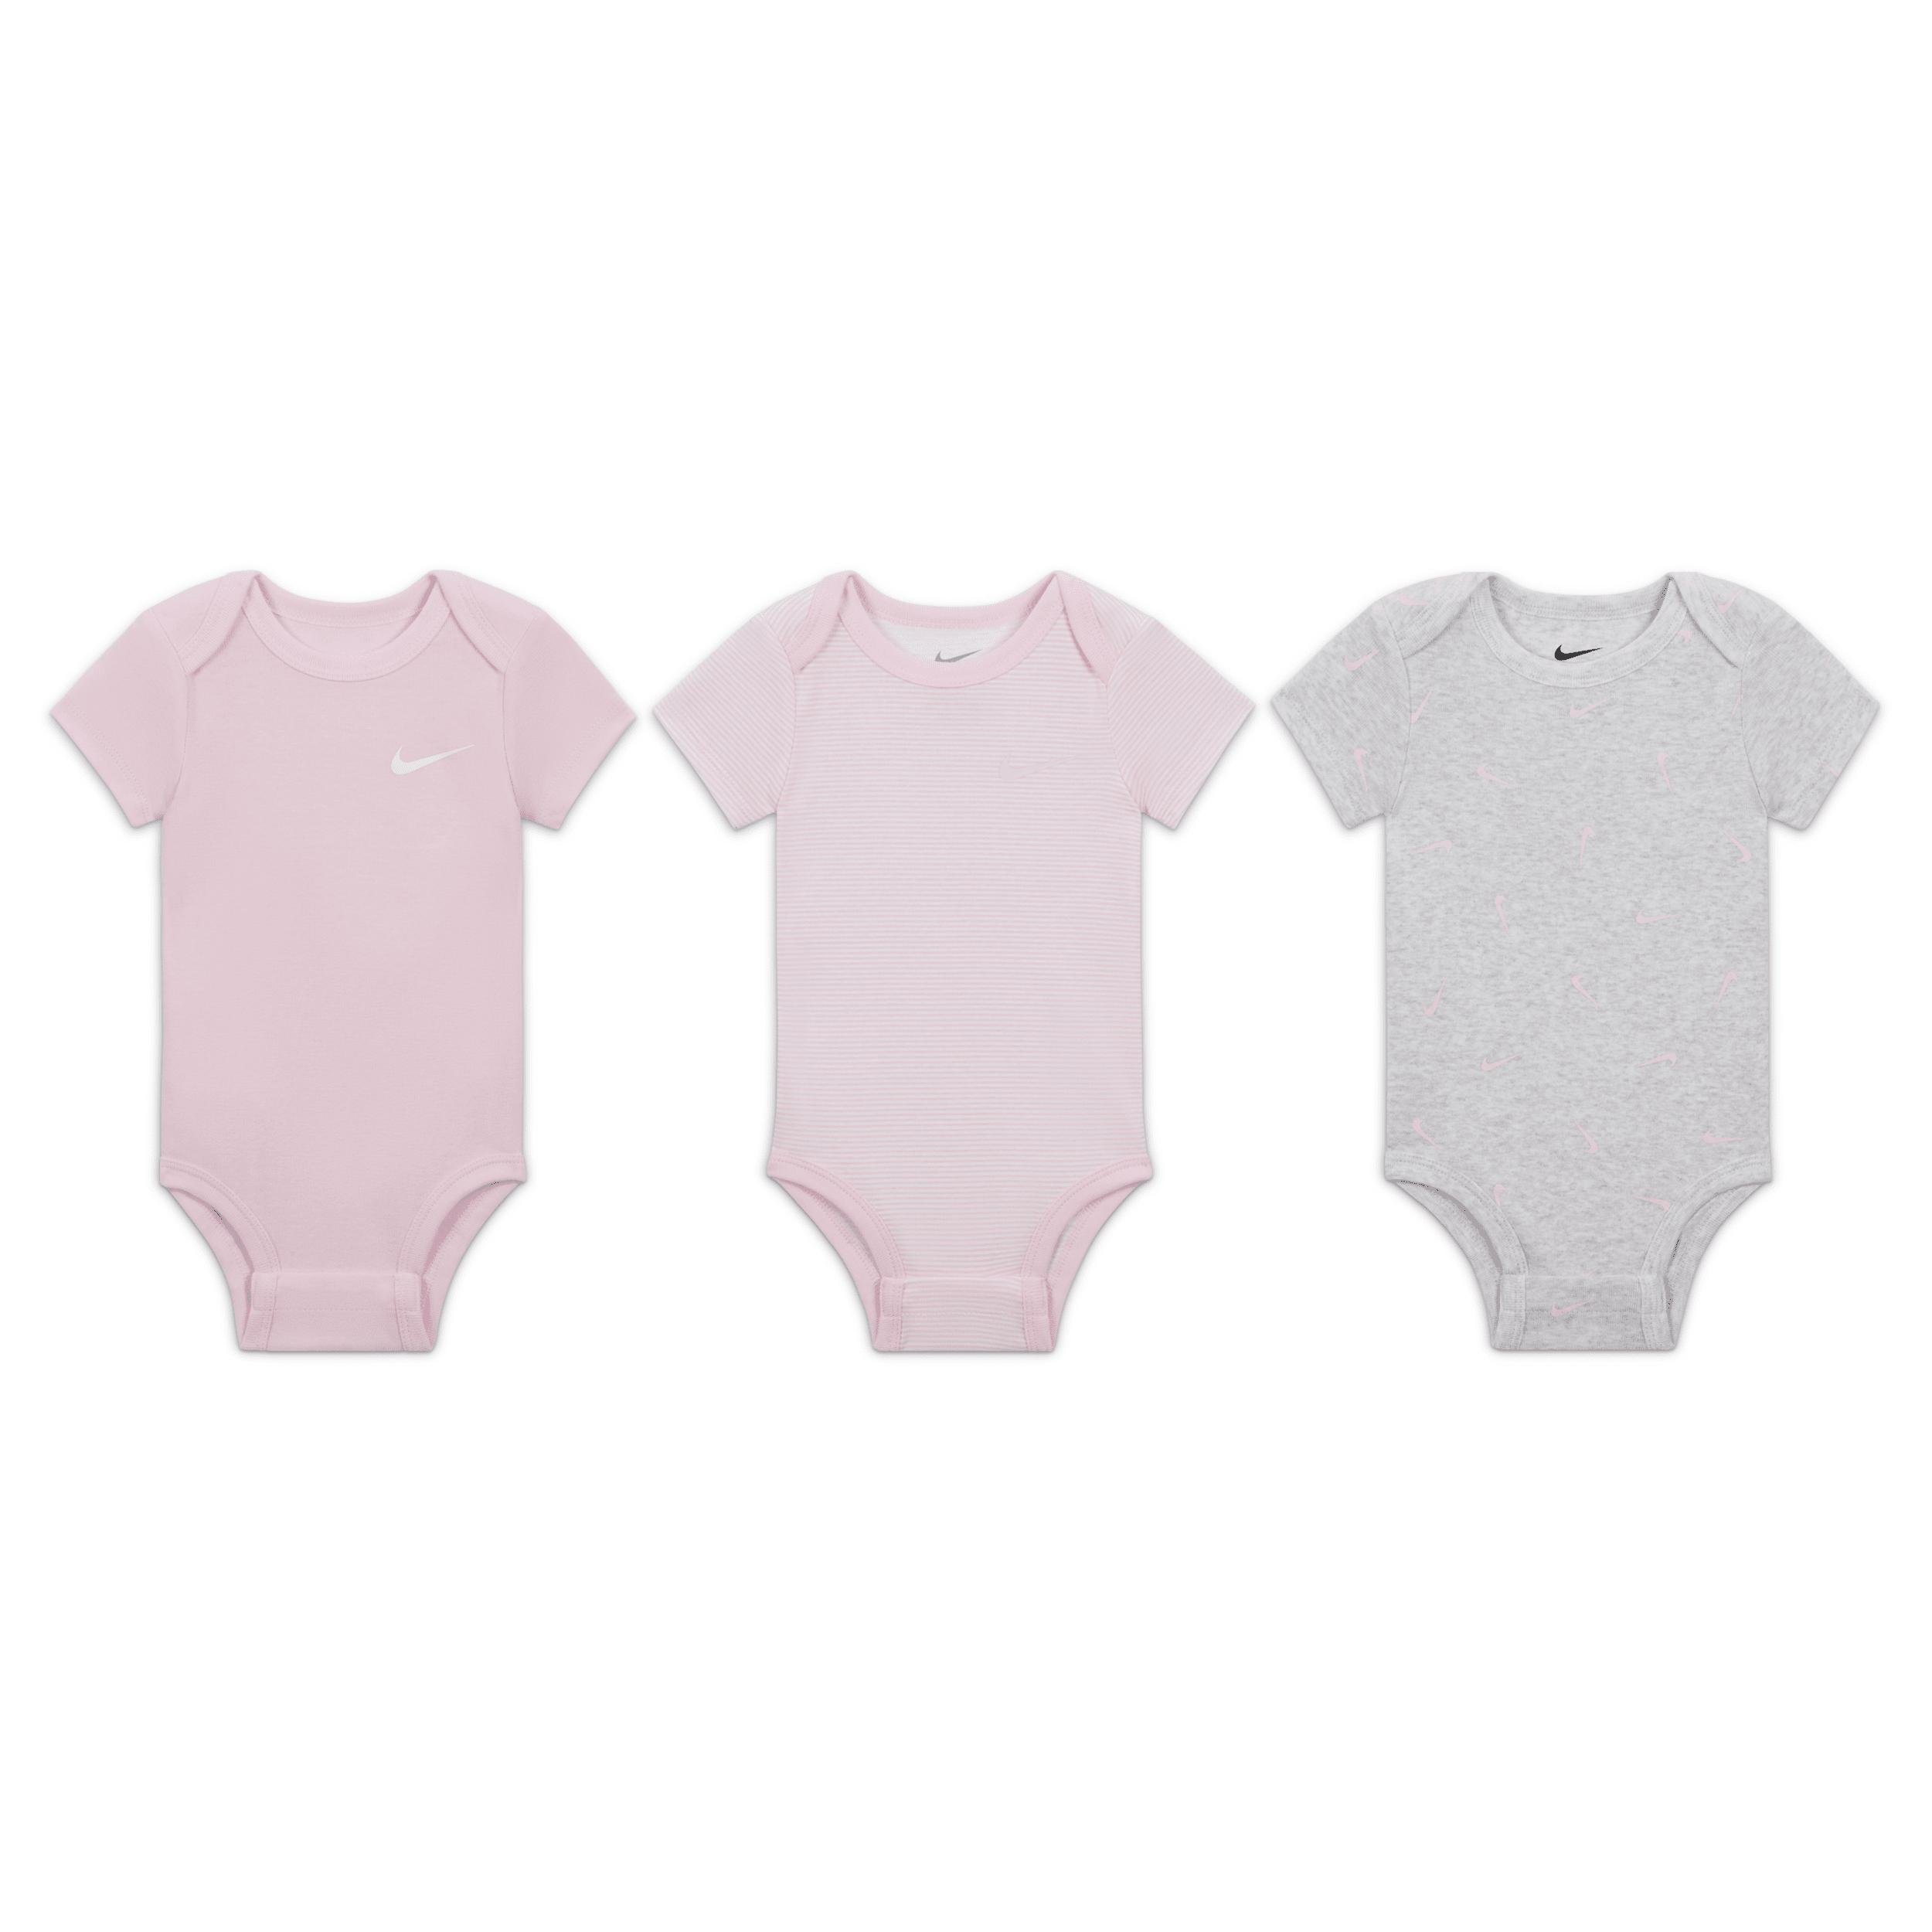 Nike Baby Essentials Baby (0-9M) 3-Pack Bodysuits by NIKE